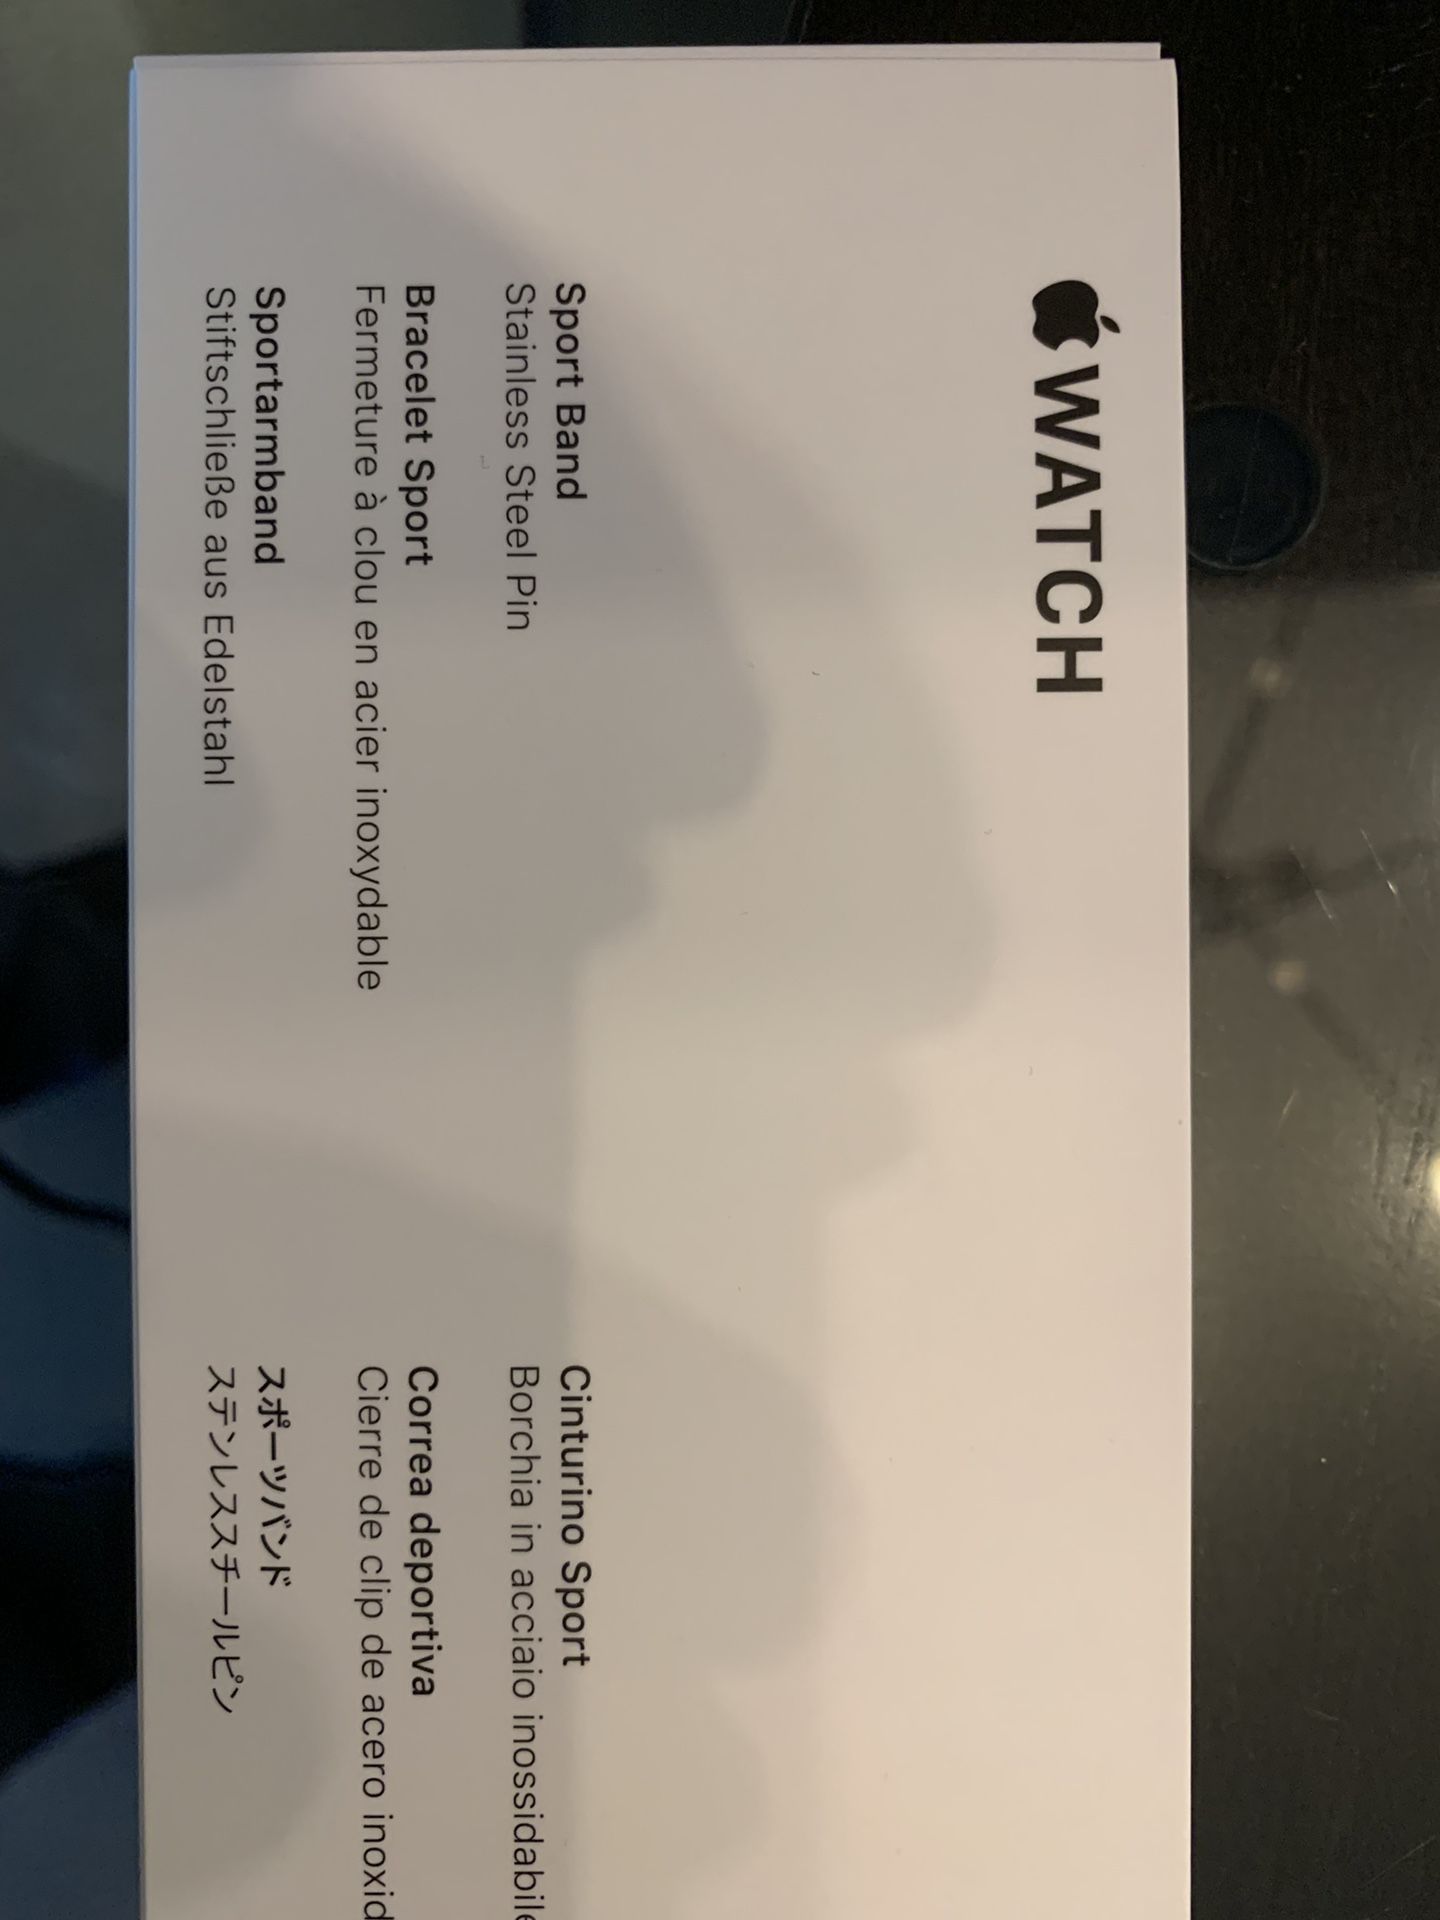 Brand new Apple Watch Sport Band - White for 42/44mm watch